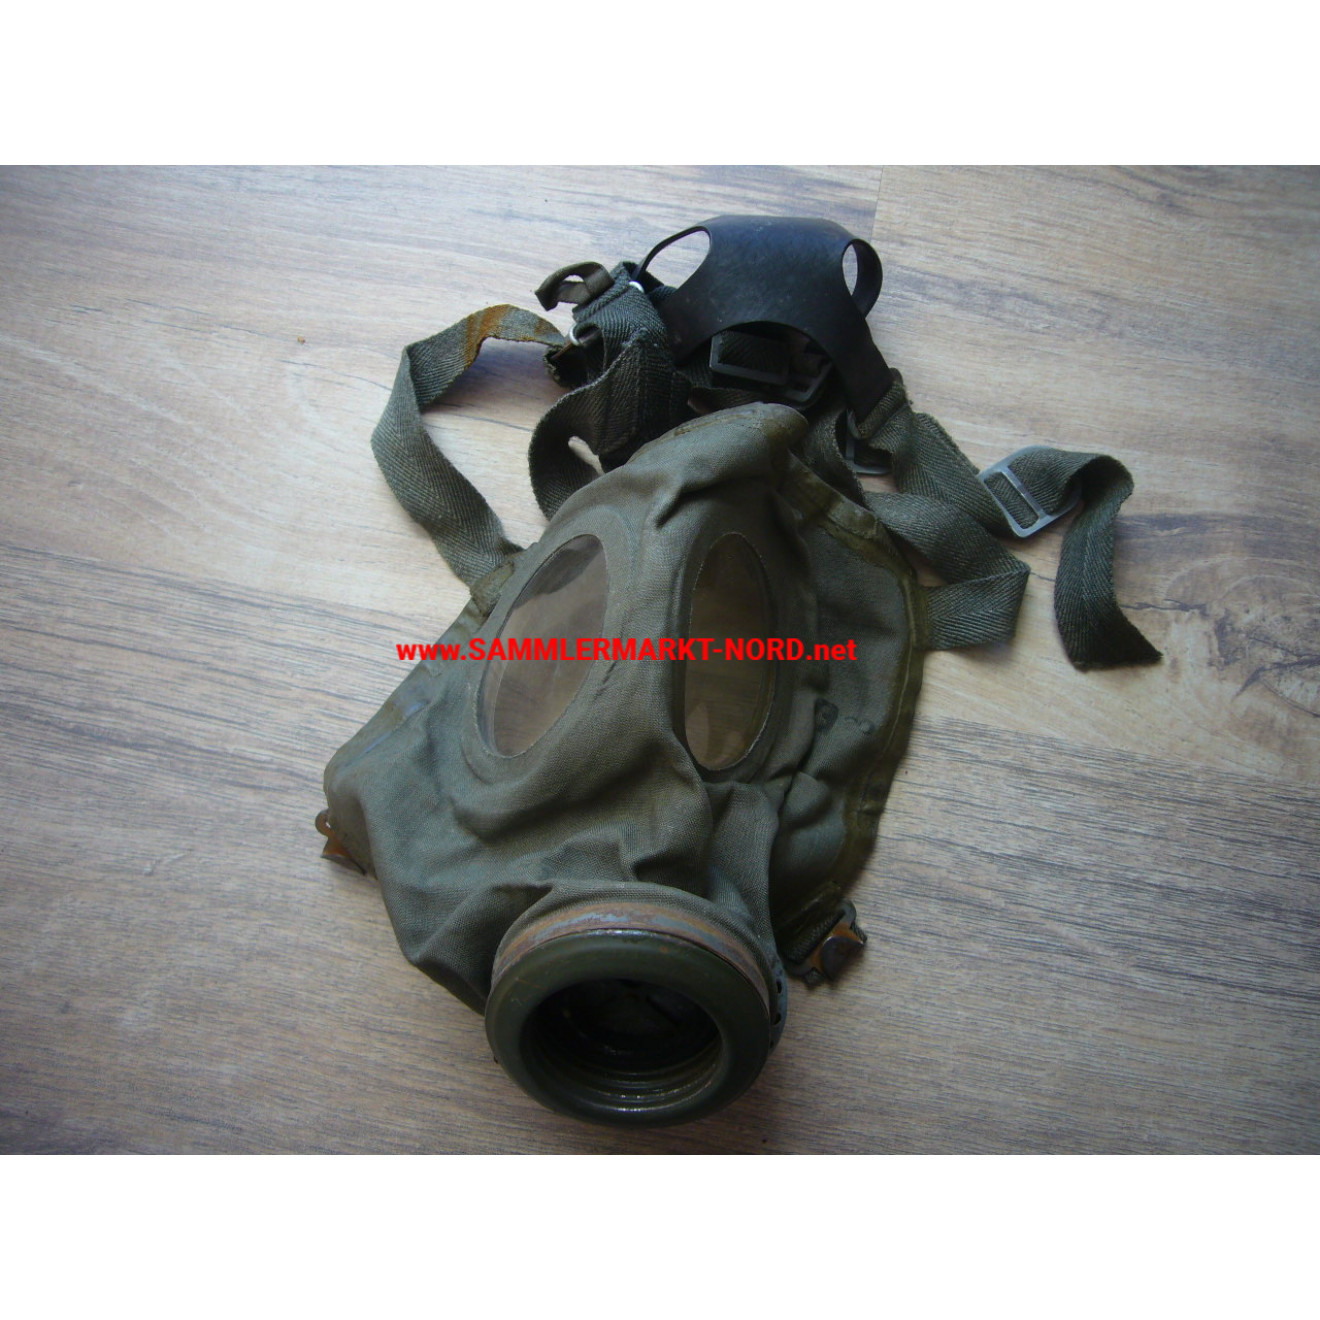 People's gas mask VM 44 (1944)